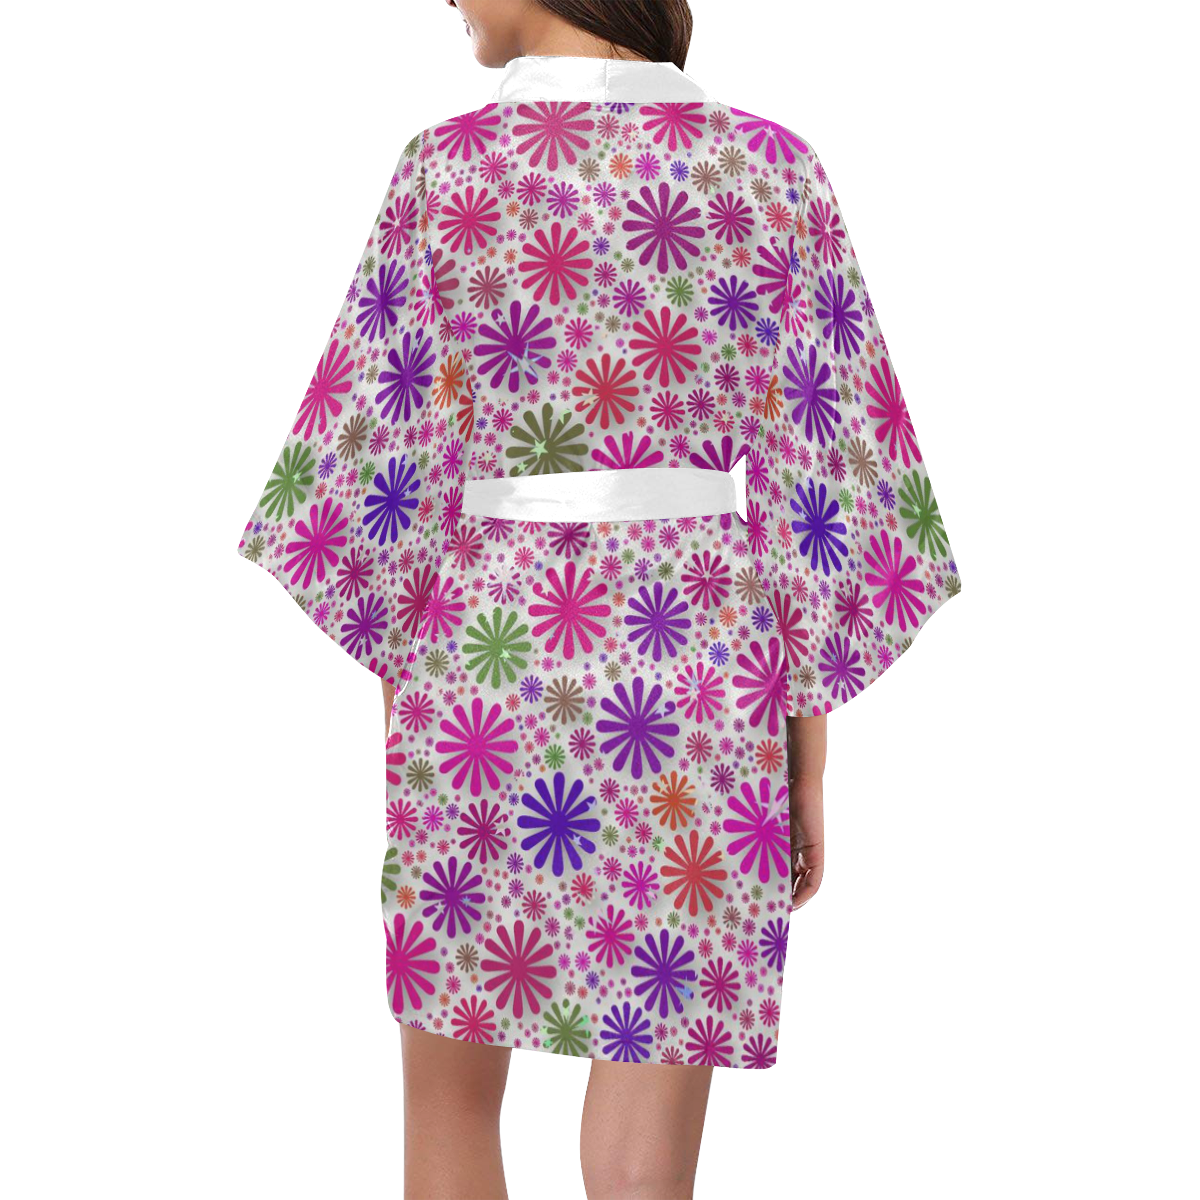 lovely shapes 3A by JamColors Kimono Robe